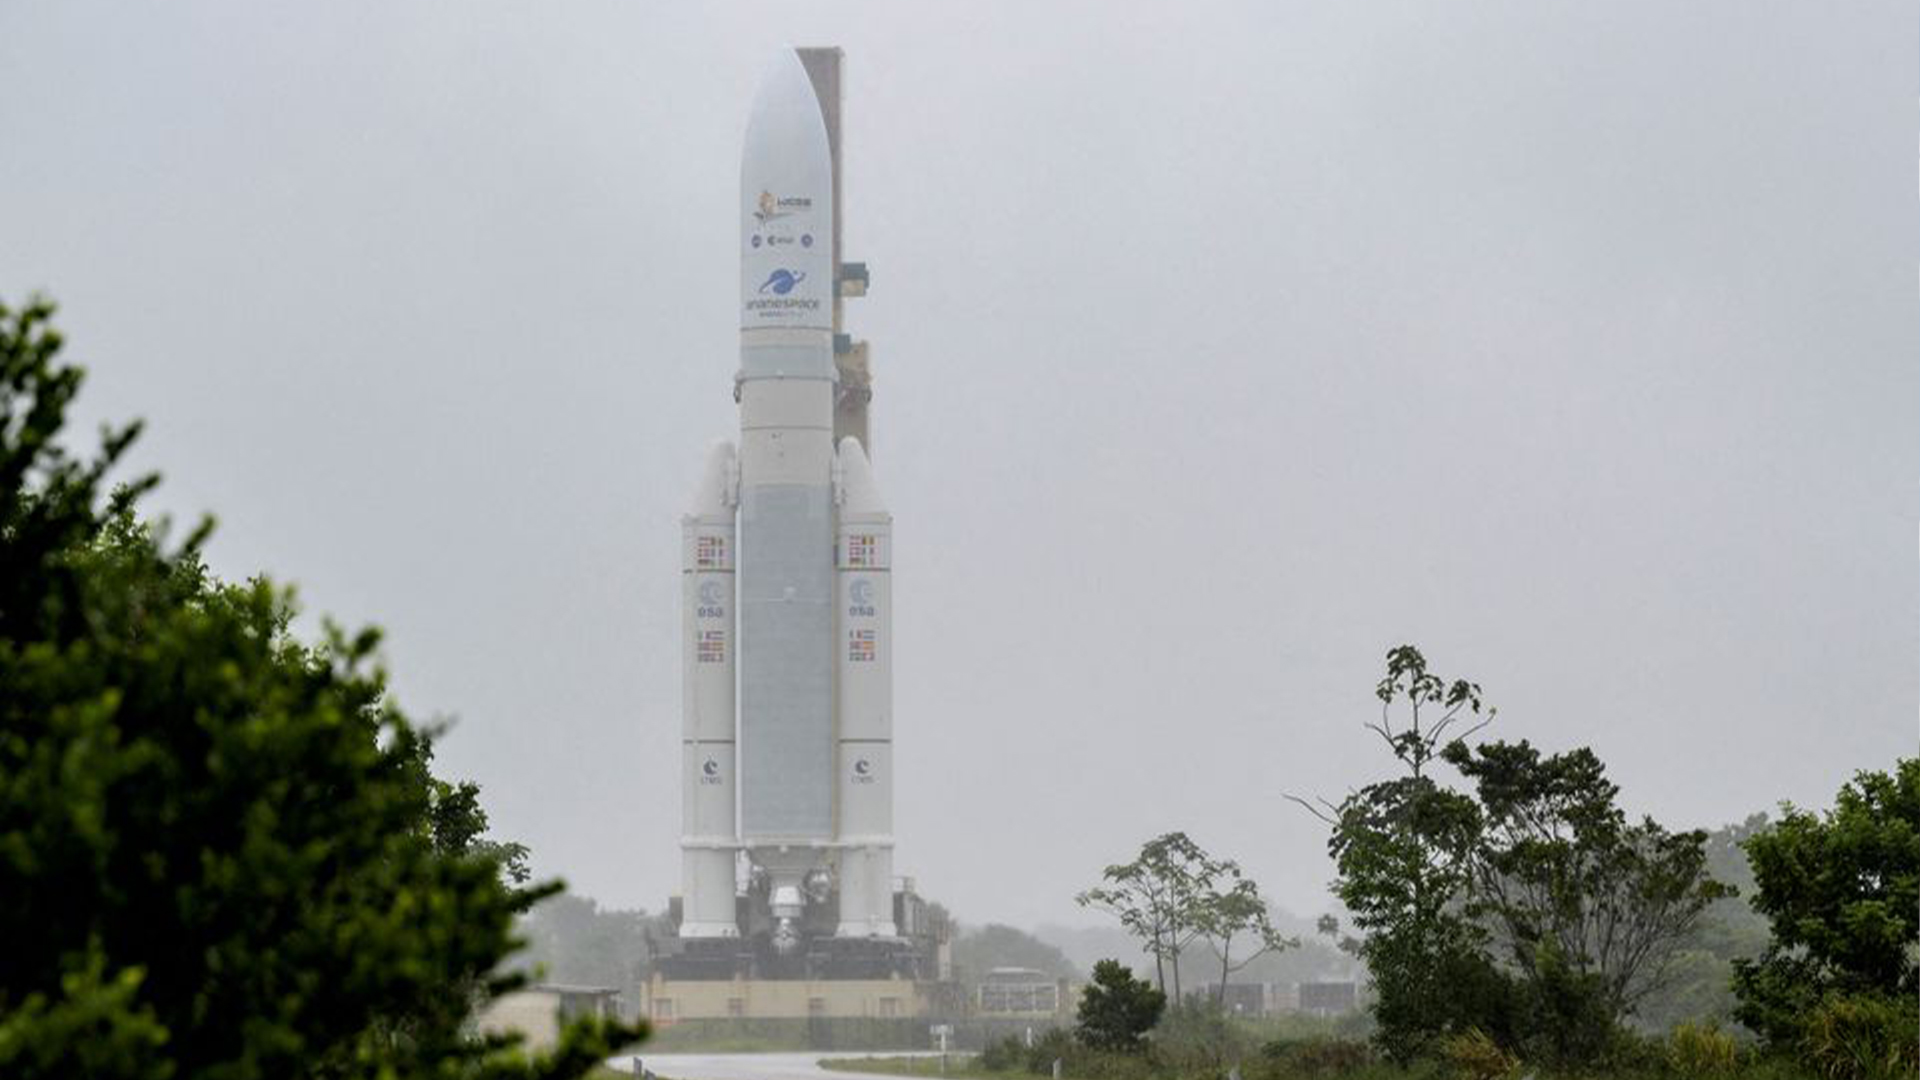  Arianespace's Ariane 5 rocket, with NASA's James Webb Space Telescope onboard, is rolled out to the launch pad at Europe’s Spaceport, the Guiana Space Center in Kourou, French Guiana December 23, 2021.  NASA/Bill Ingalls/Handout via REUTERS